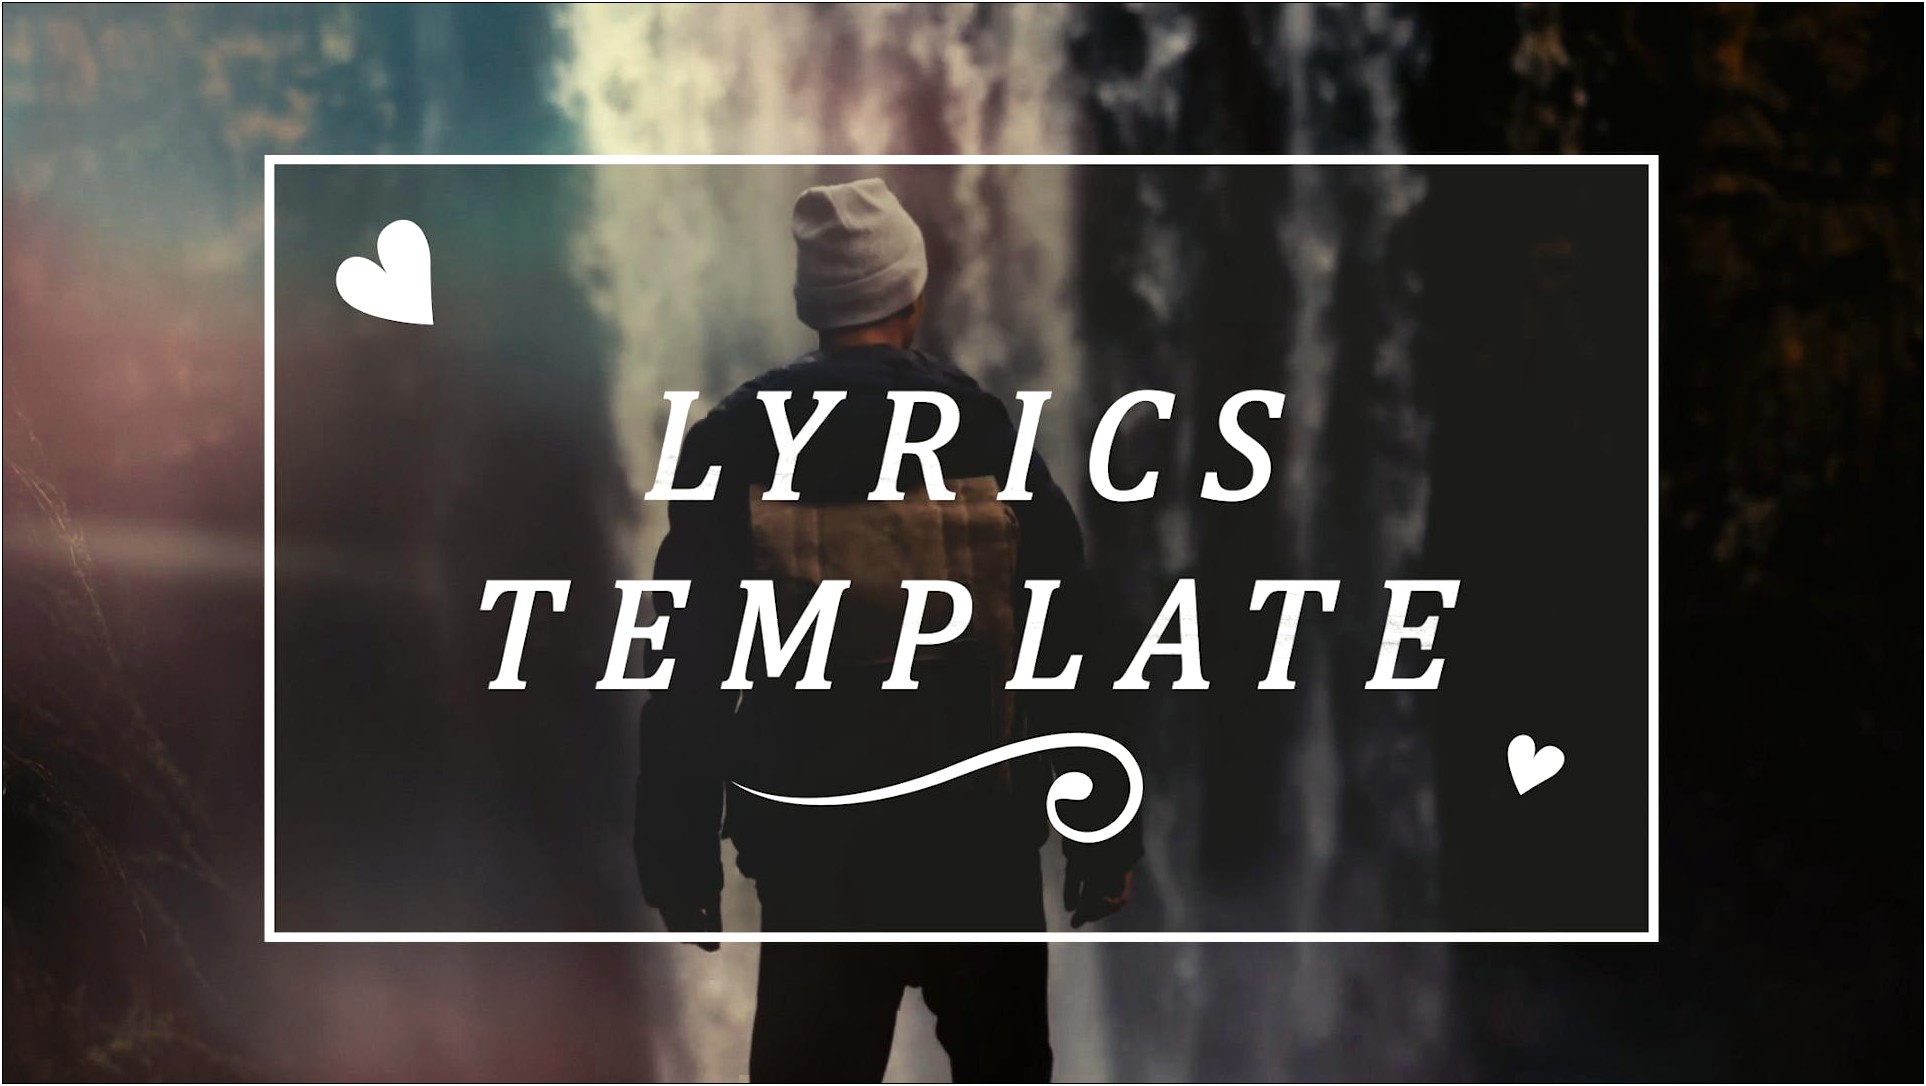 Lyrics Template After Effects Free Download